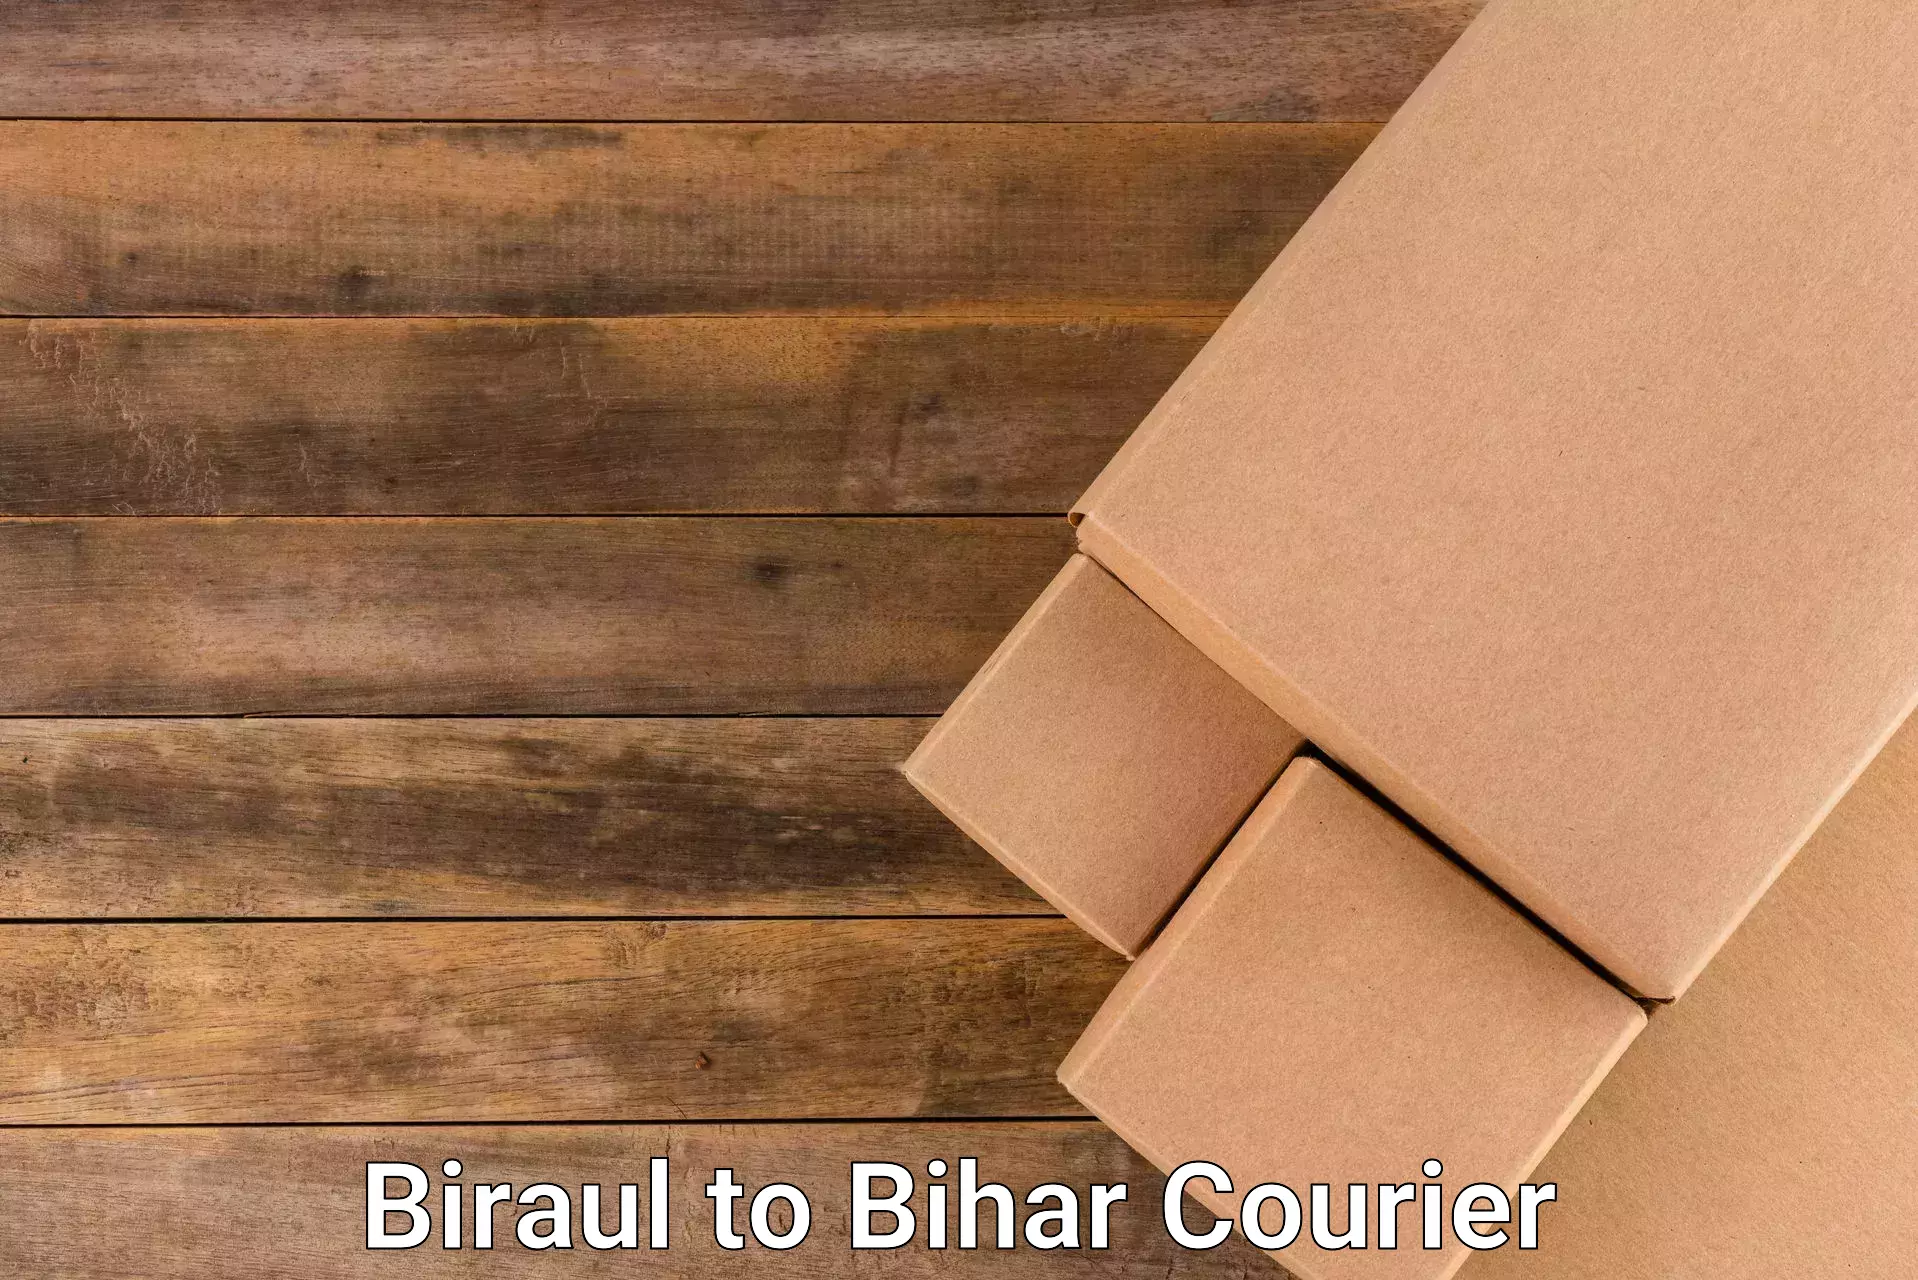 State-of-the-art courier technology Biraul to Bihar